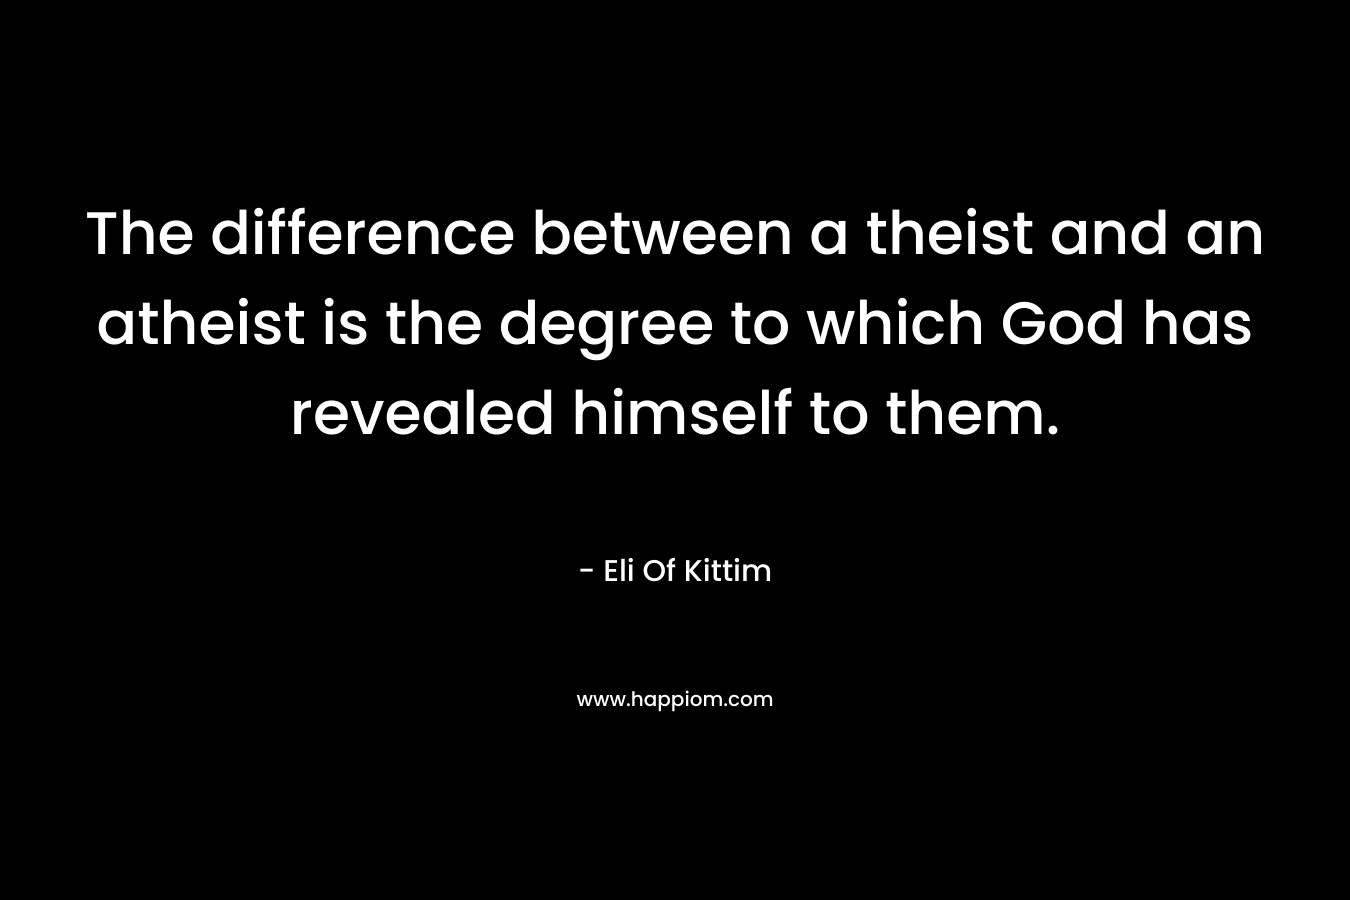 The difference between a theist and an atheist is the degree to which God has revealed himself to them. – Eli Of Kittim